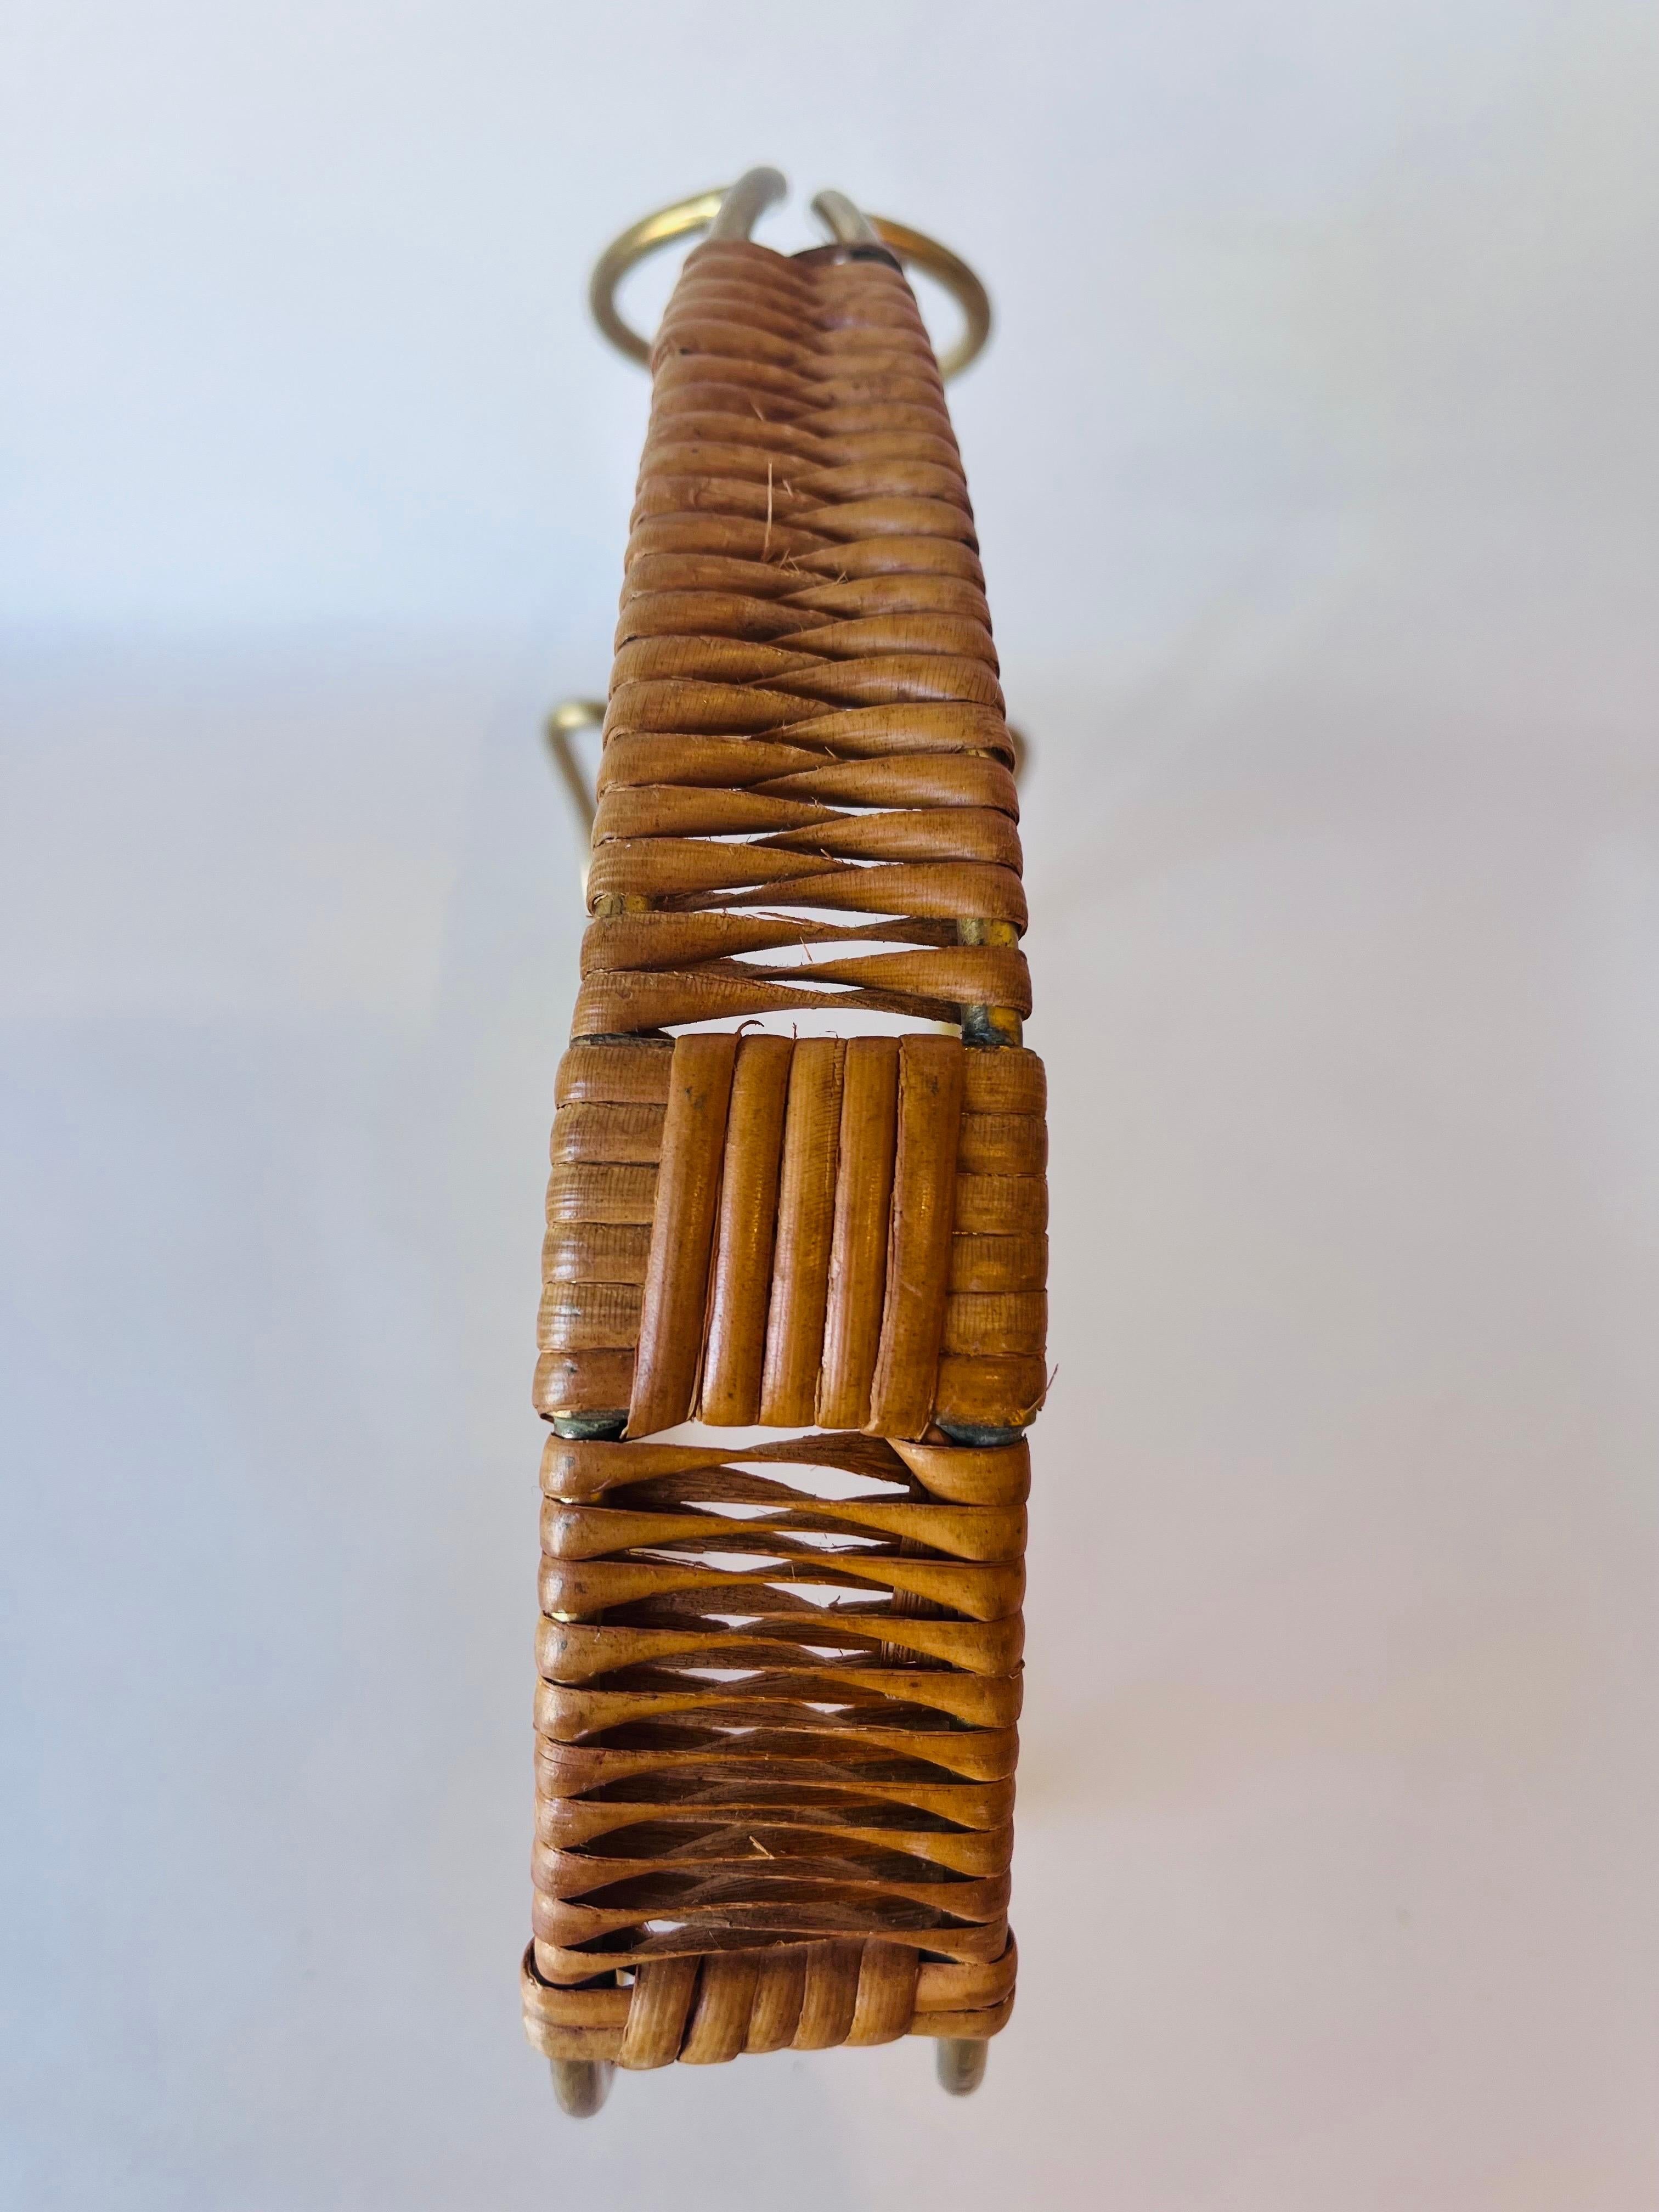 A vintage, mid century brass and woven rattan wine bottle holder / decanter designed in the style of Carl Aubock. In vintage condition with a beautiful patina with the requisite nicks and marks indicating a life well lived and loved to this brass